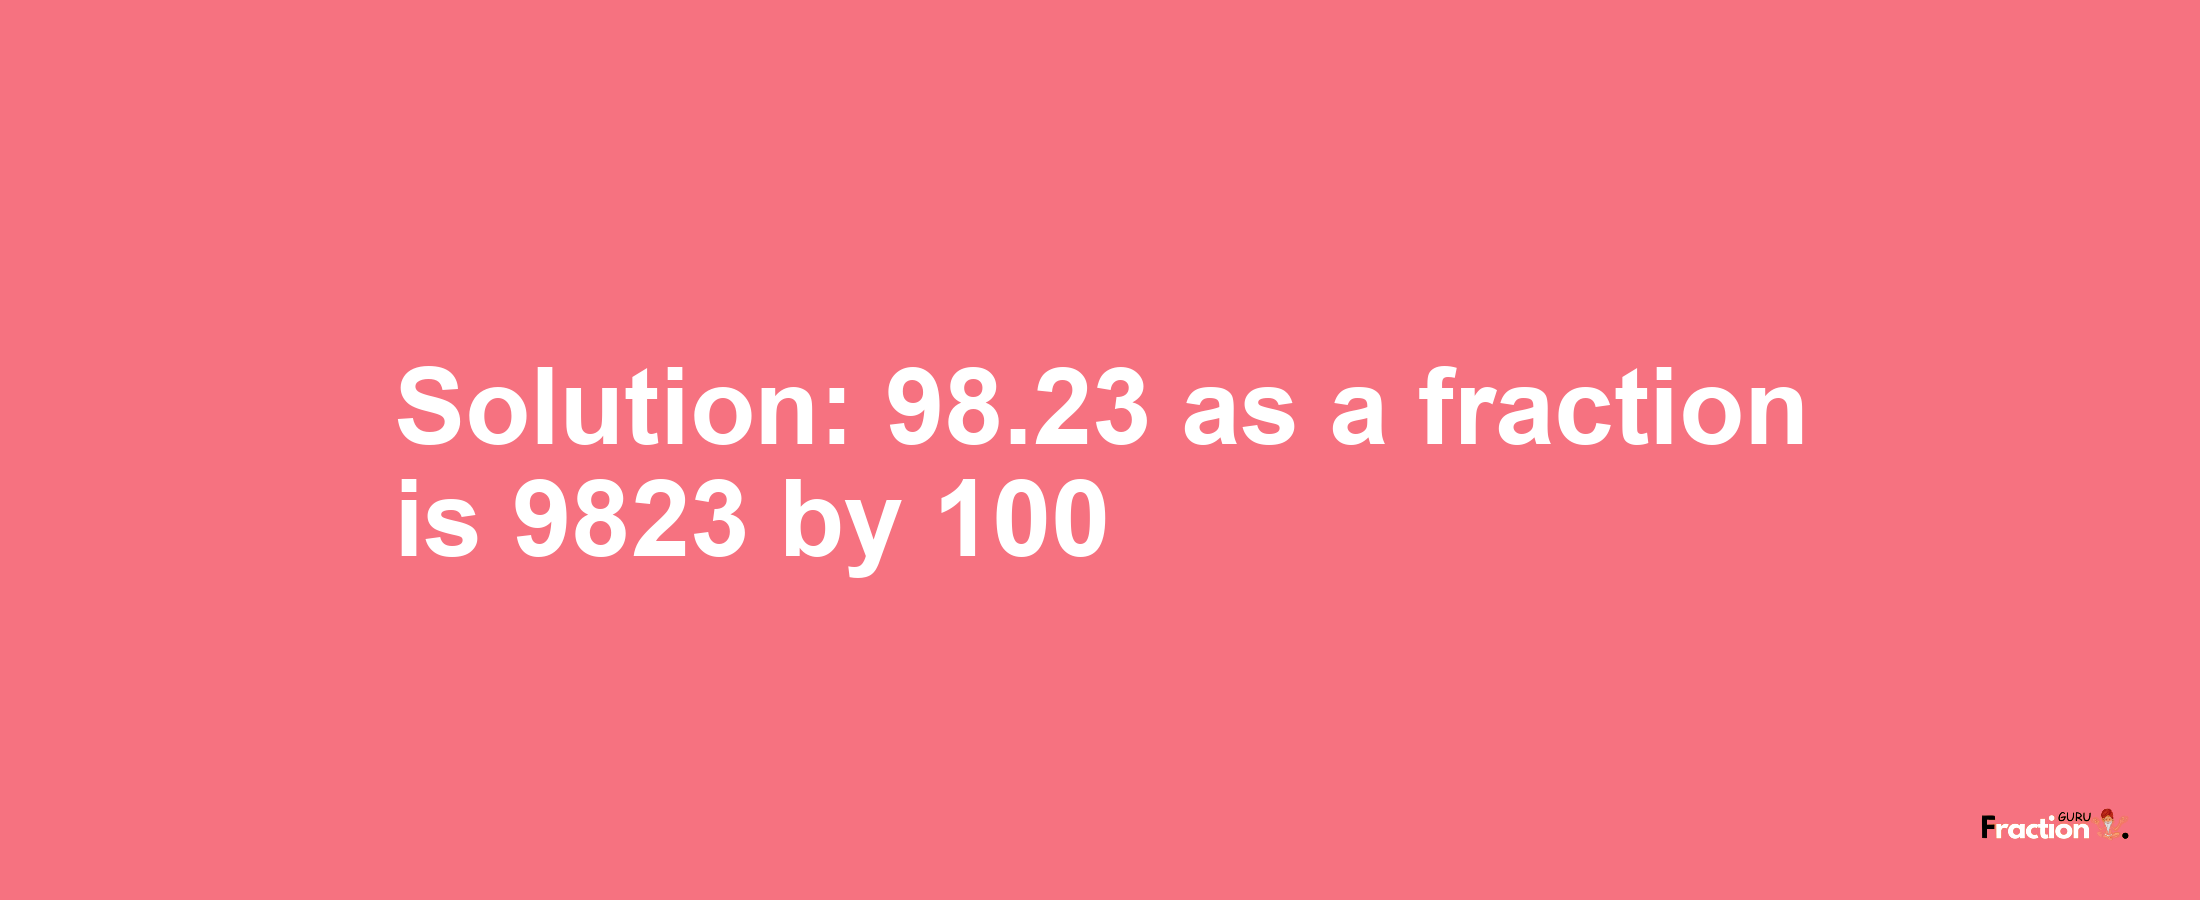 Solution:98.23 as a fraction is 9823/100